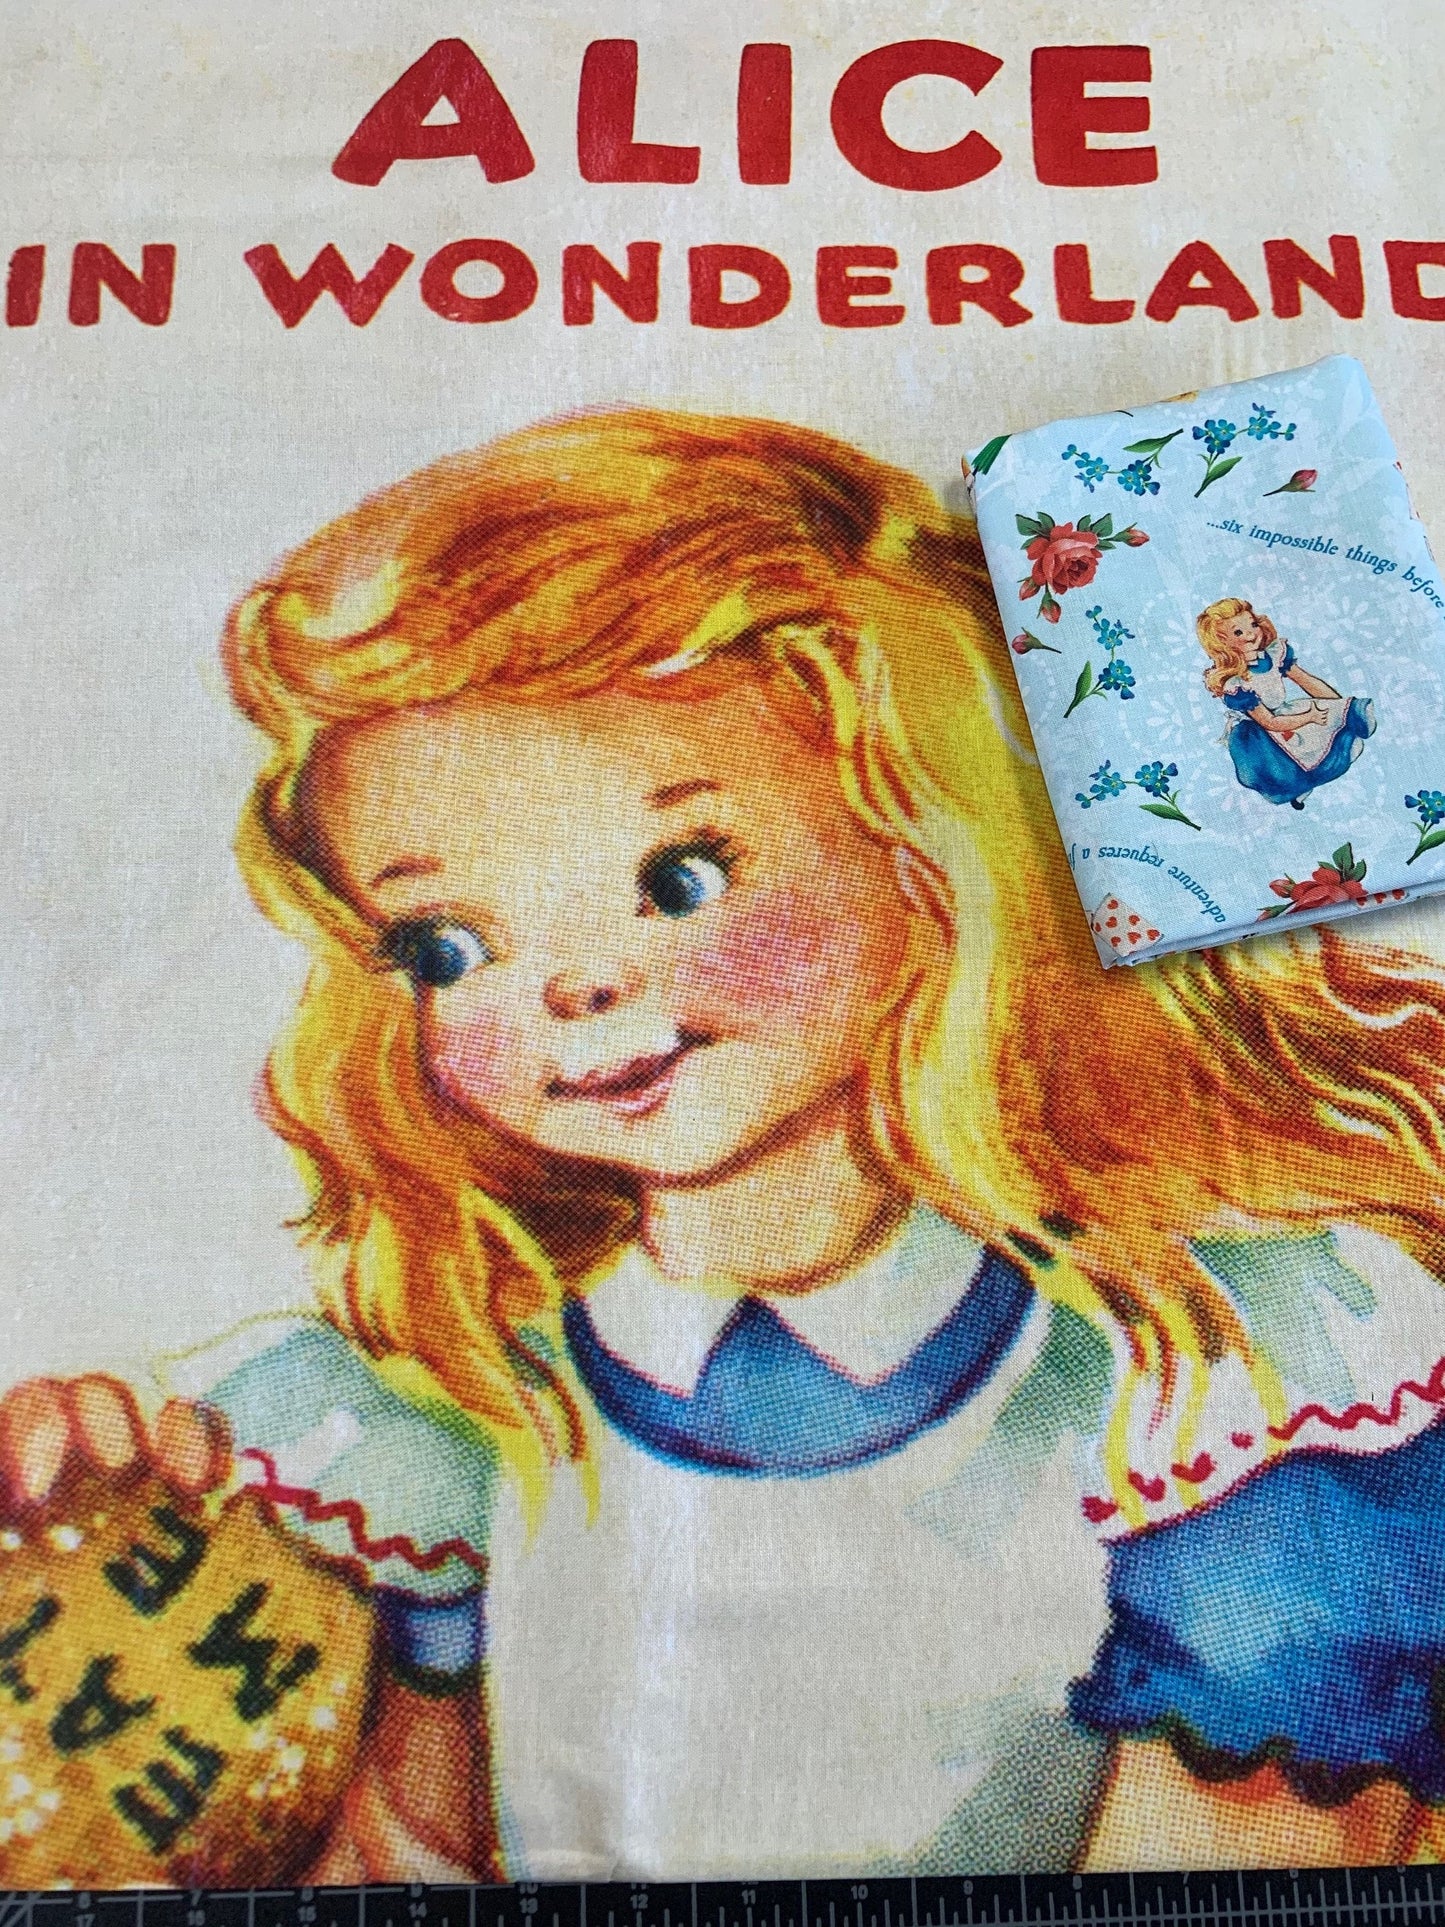 Vintage Storybooks from Four Seasons 36" Panel Alice in Wonderland BW01480C1 Cotton Woven Panel